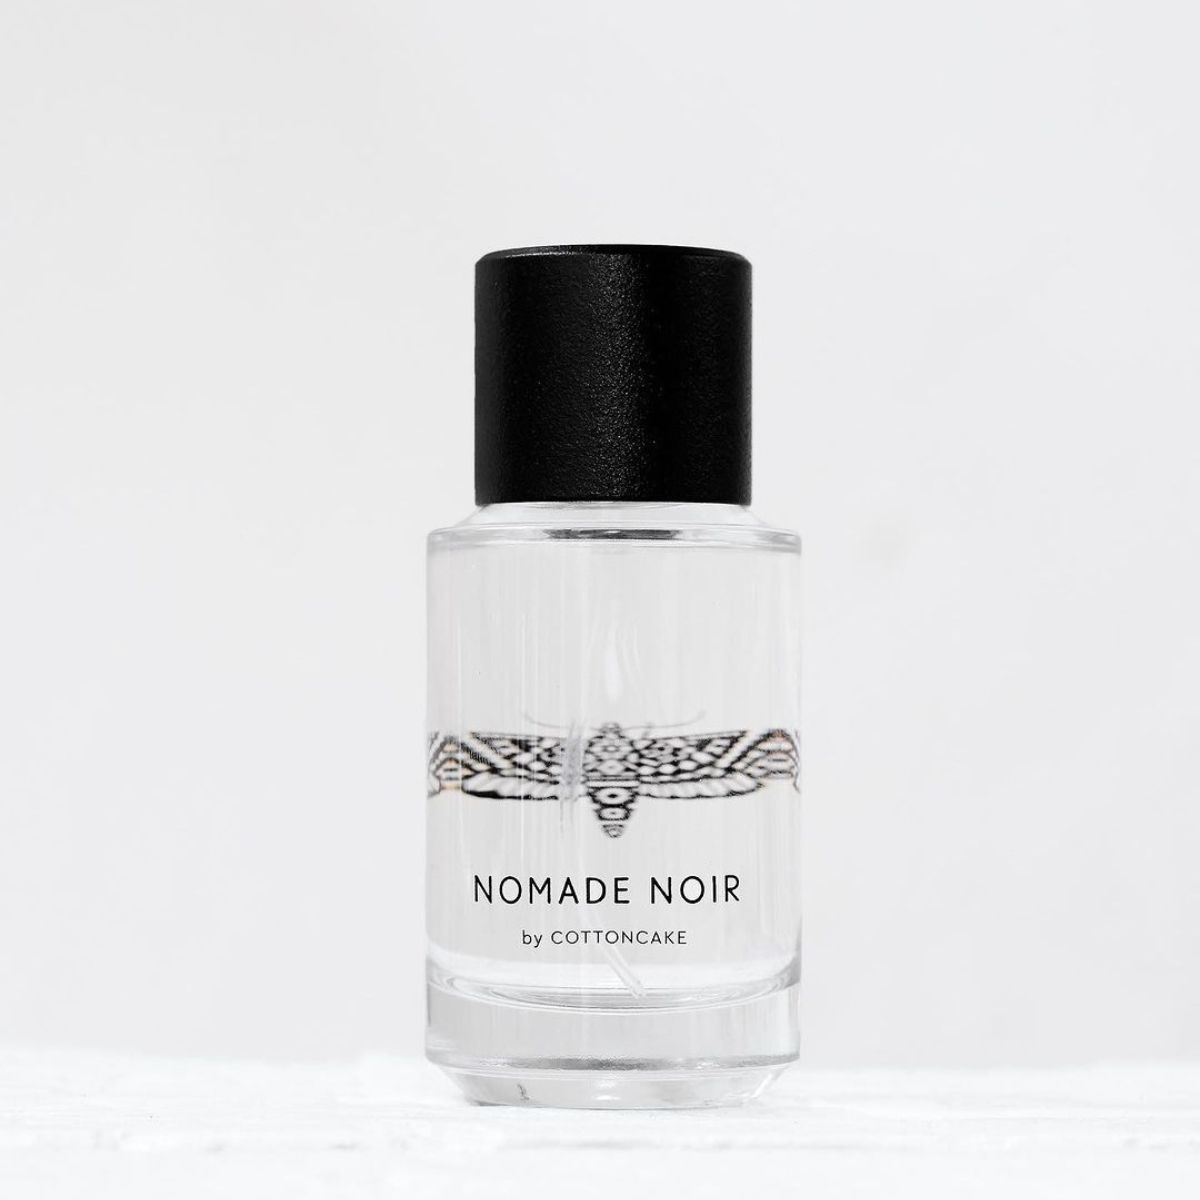 Image of Nomade Noir by the perfume brand Cottoncake